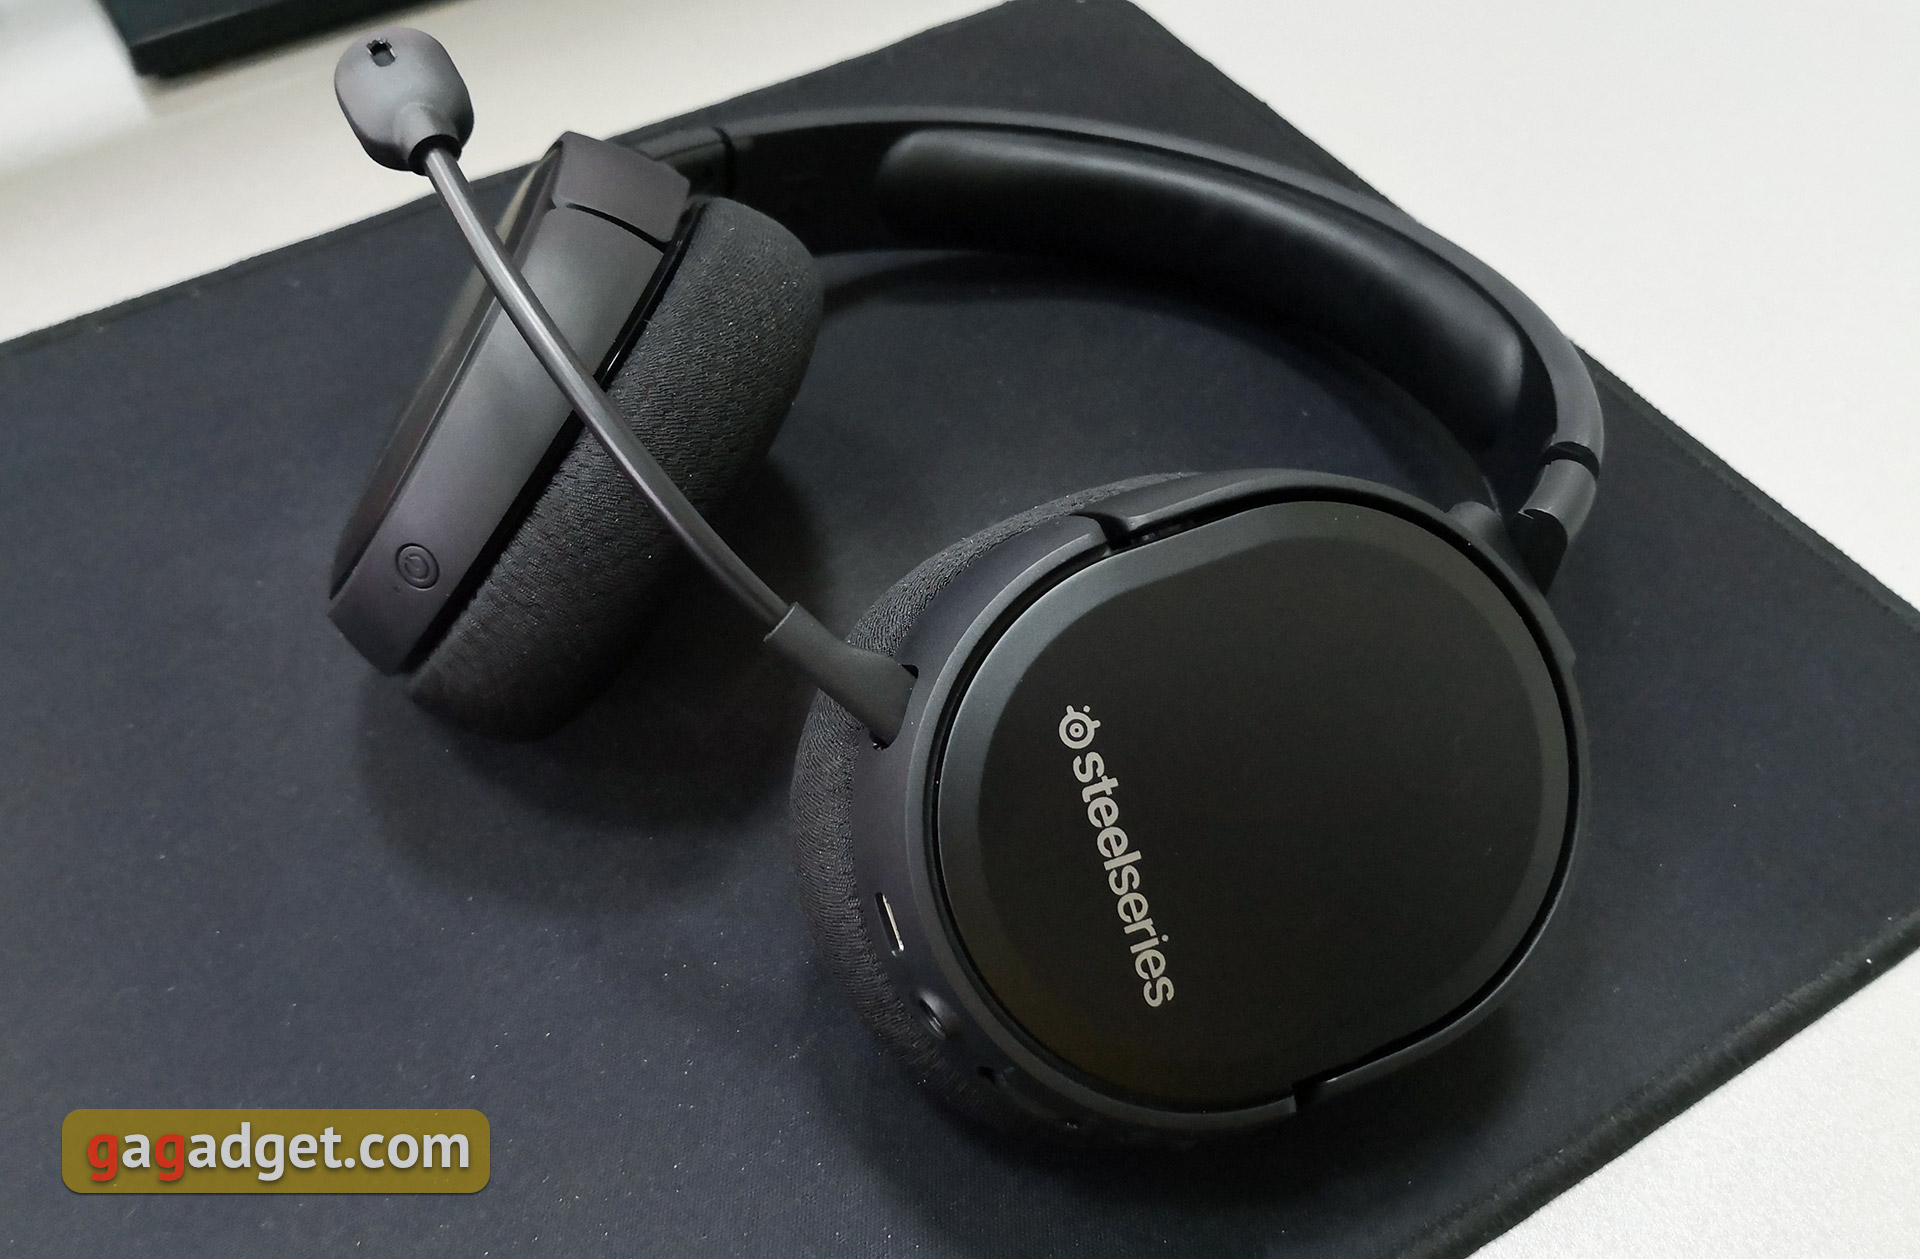 Steelseries Arctis 1 Wireless Review Wireless Gaming Headset For All Platforms Geek Tech Online